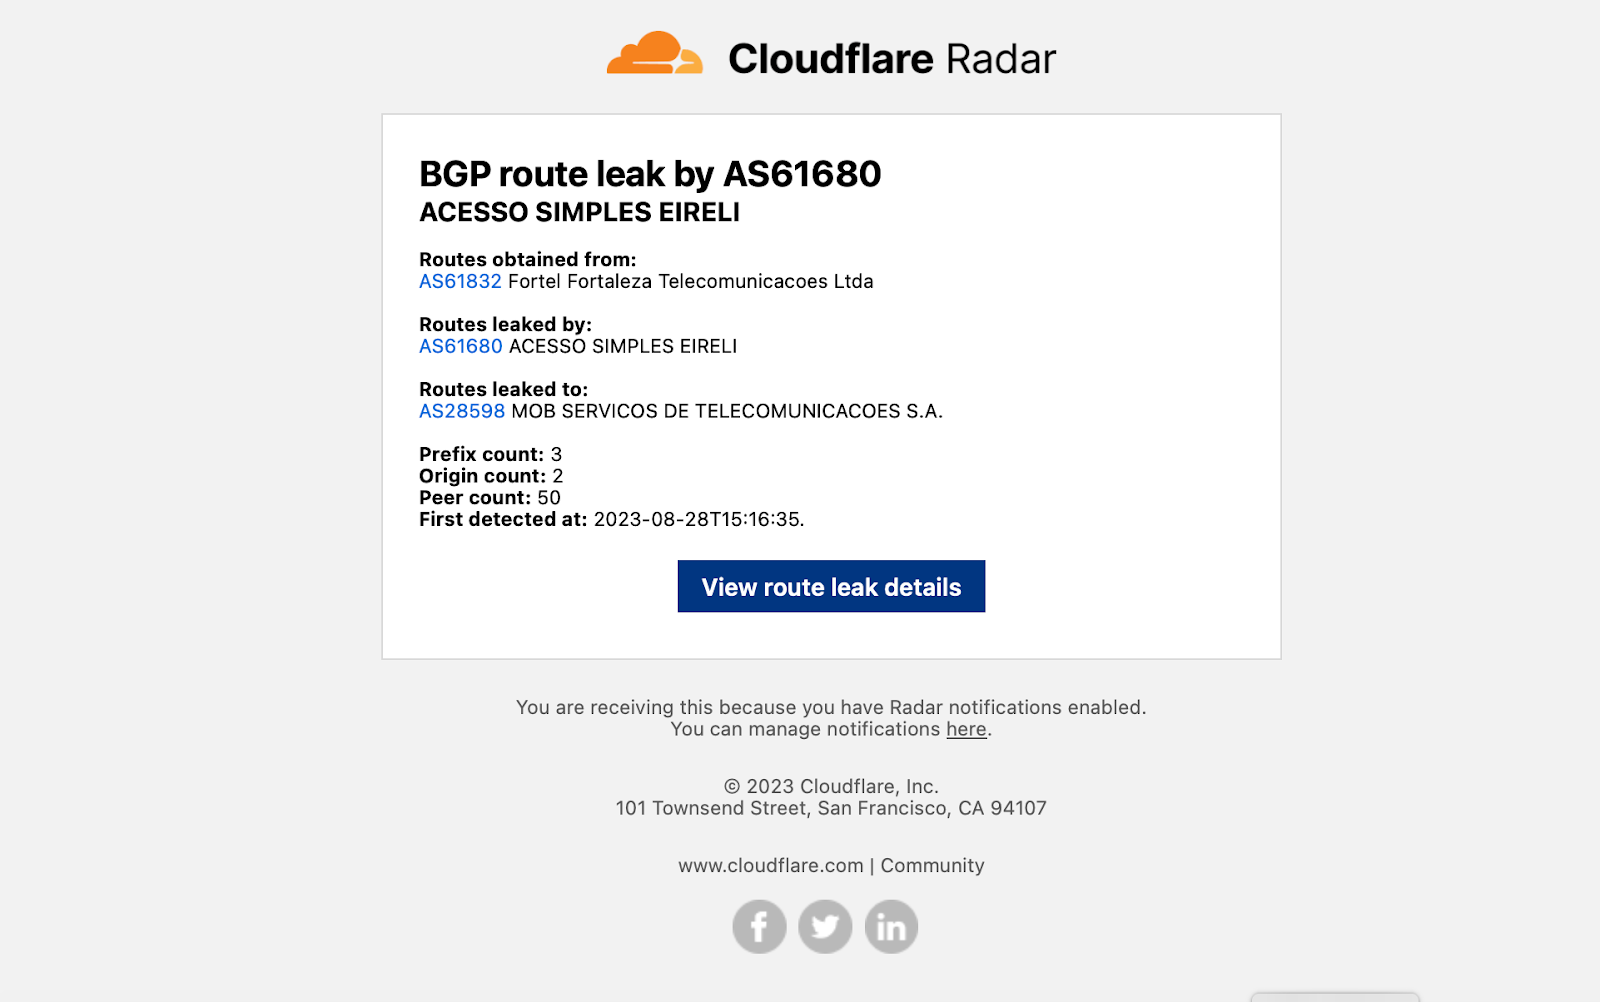 Traffic anomalies and notifications with Cloudflare Radar